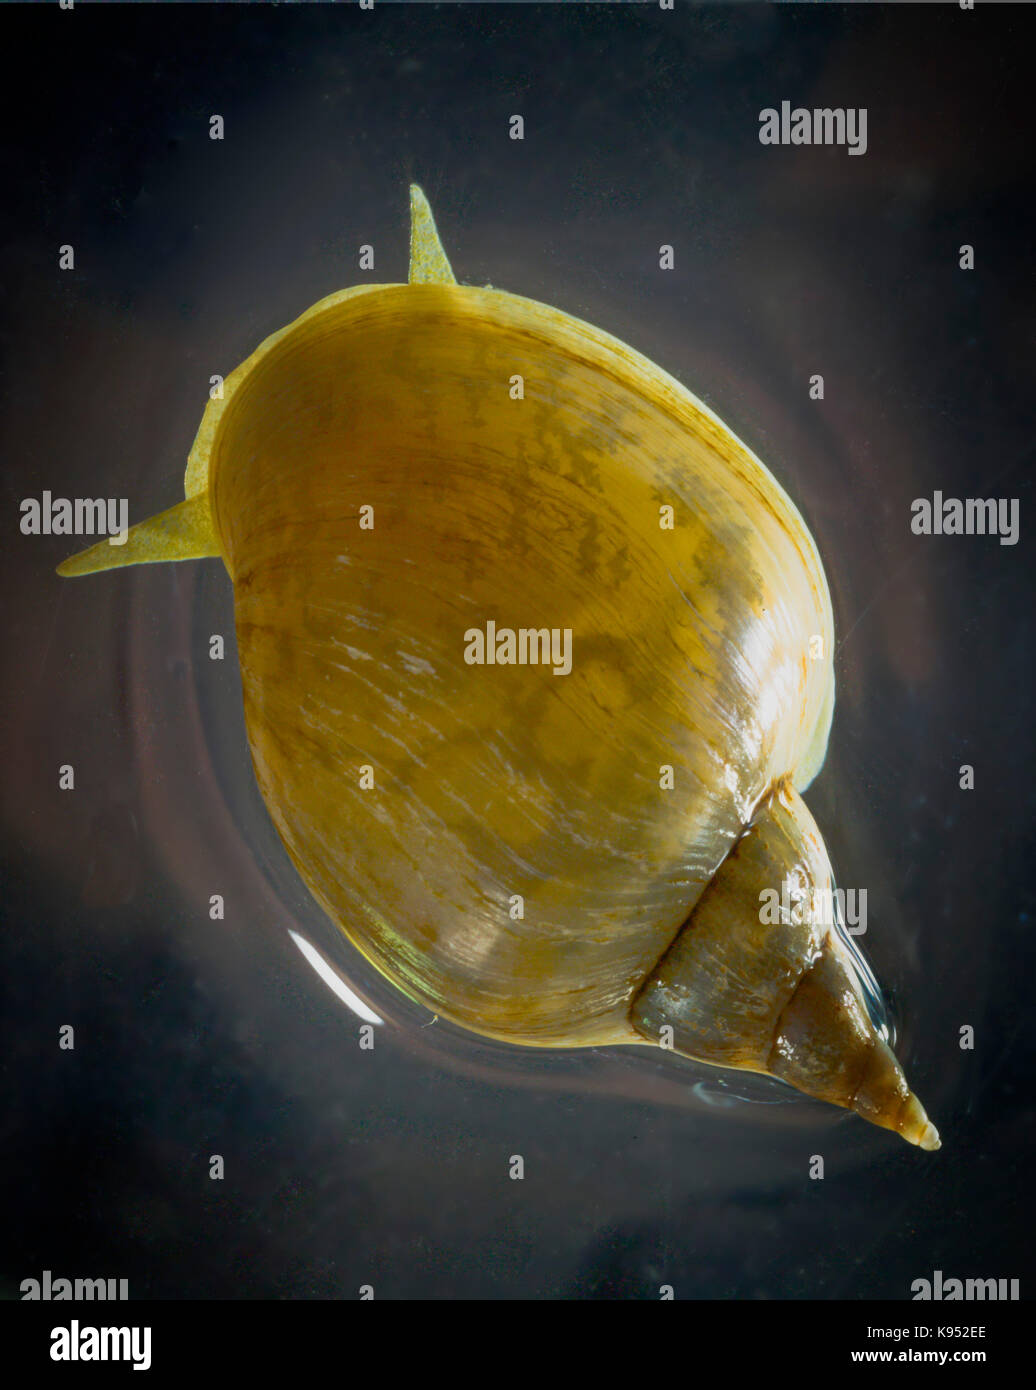 Upper view of a swimming Common Pond Snail (Lymnaea stagnalis). Stock Photo